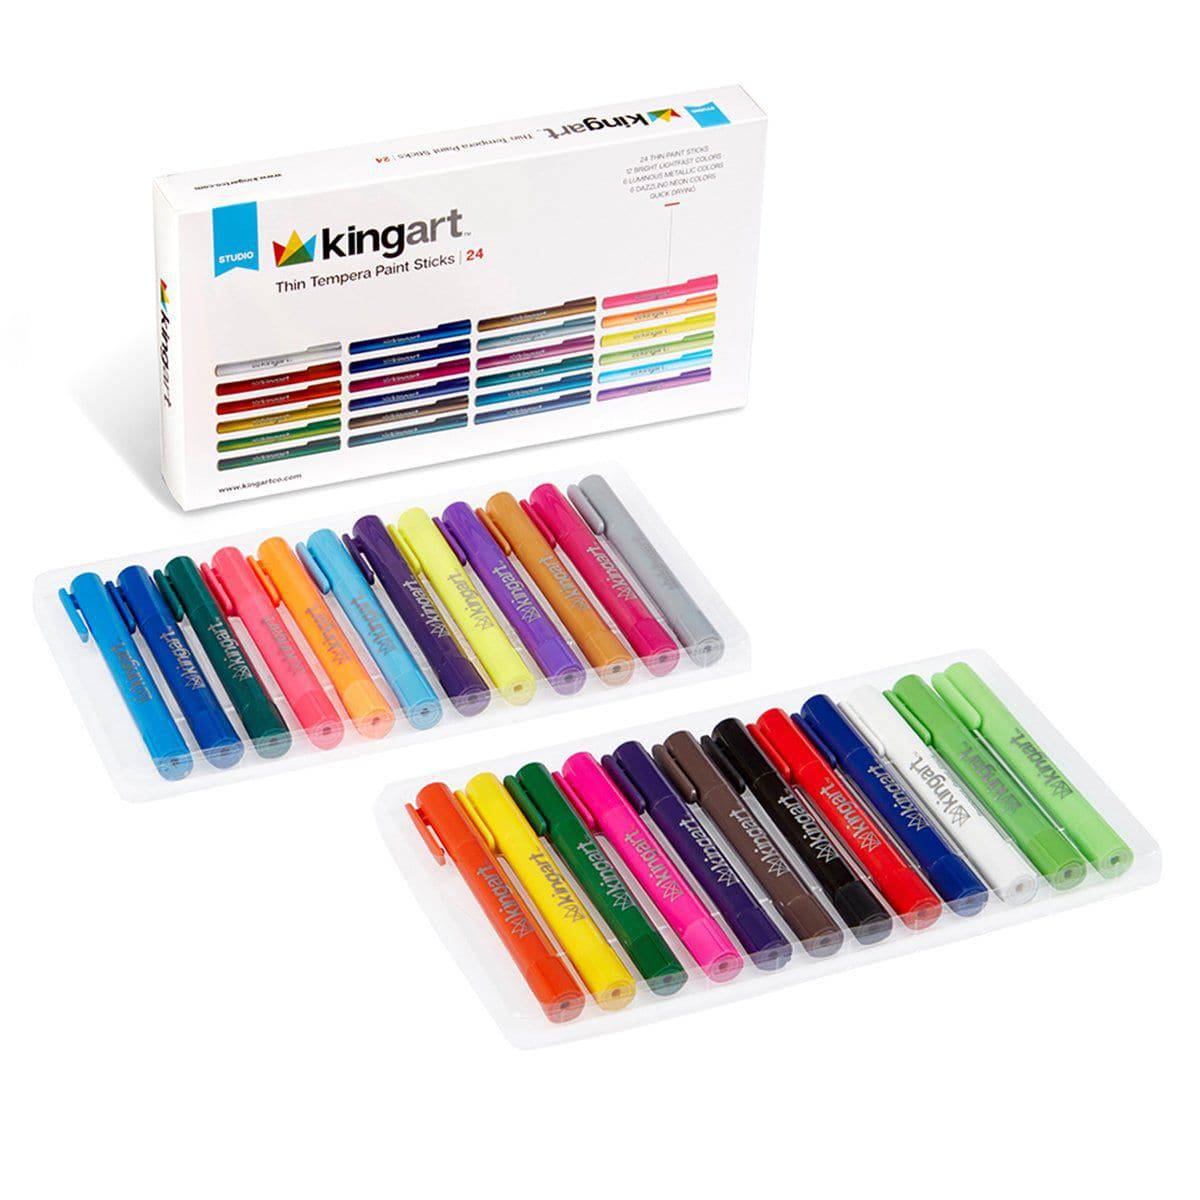 KINGART® Tempera Paint Thin Sticks, 24 Vibrant Colors Solid Tempera Paint  for Kids, Super Quick Drying, Works Great on Paper Wood Glass Ceramic  Canvas